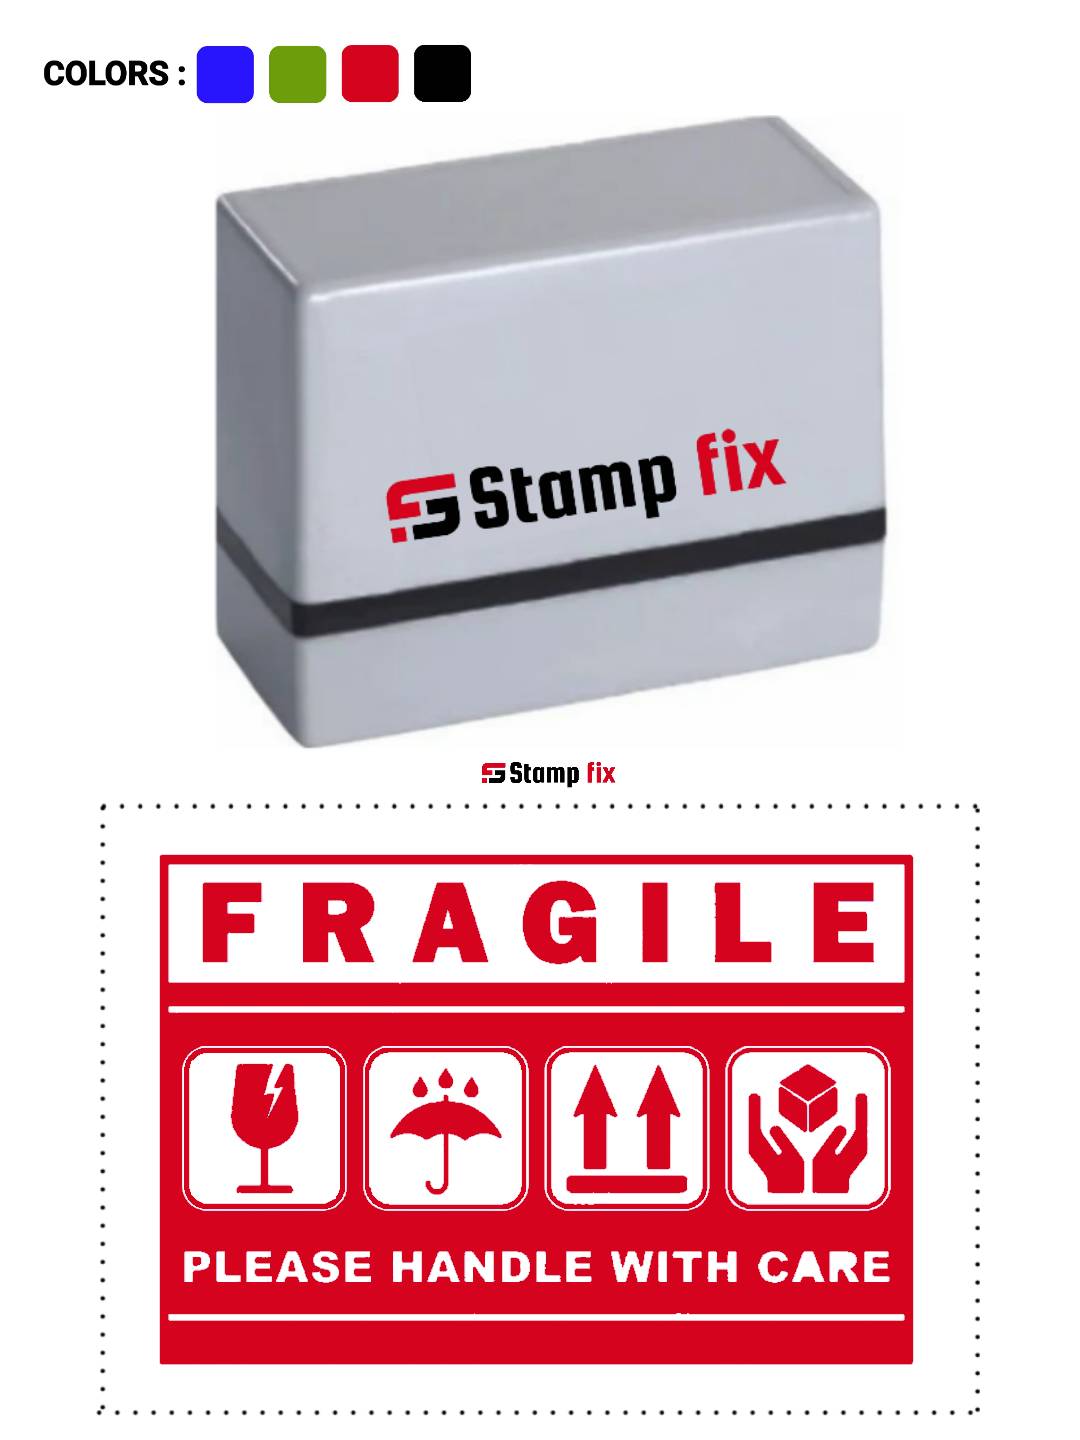 Pre Ink Fragile stamp, cartoon box stamp, amazon stamp, glass ware stamp, warning stamp, Stamp by StampFix, a self-inking stamp with high-quality impressions
in India, nylon stamp, rubber stamp, pre ink stamp, polymer stamp, urgent stamp